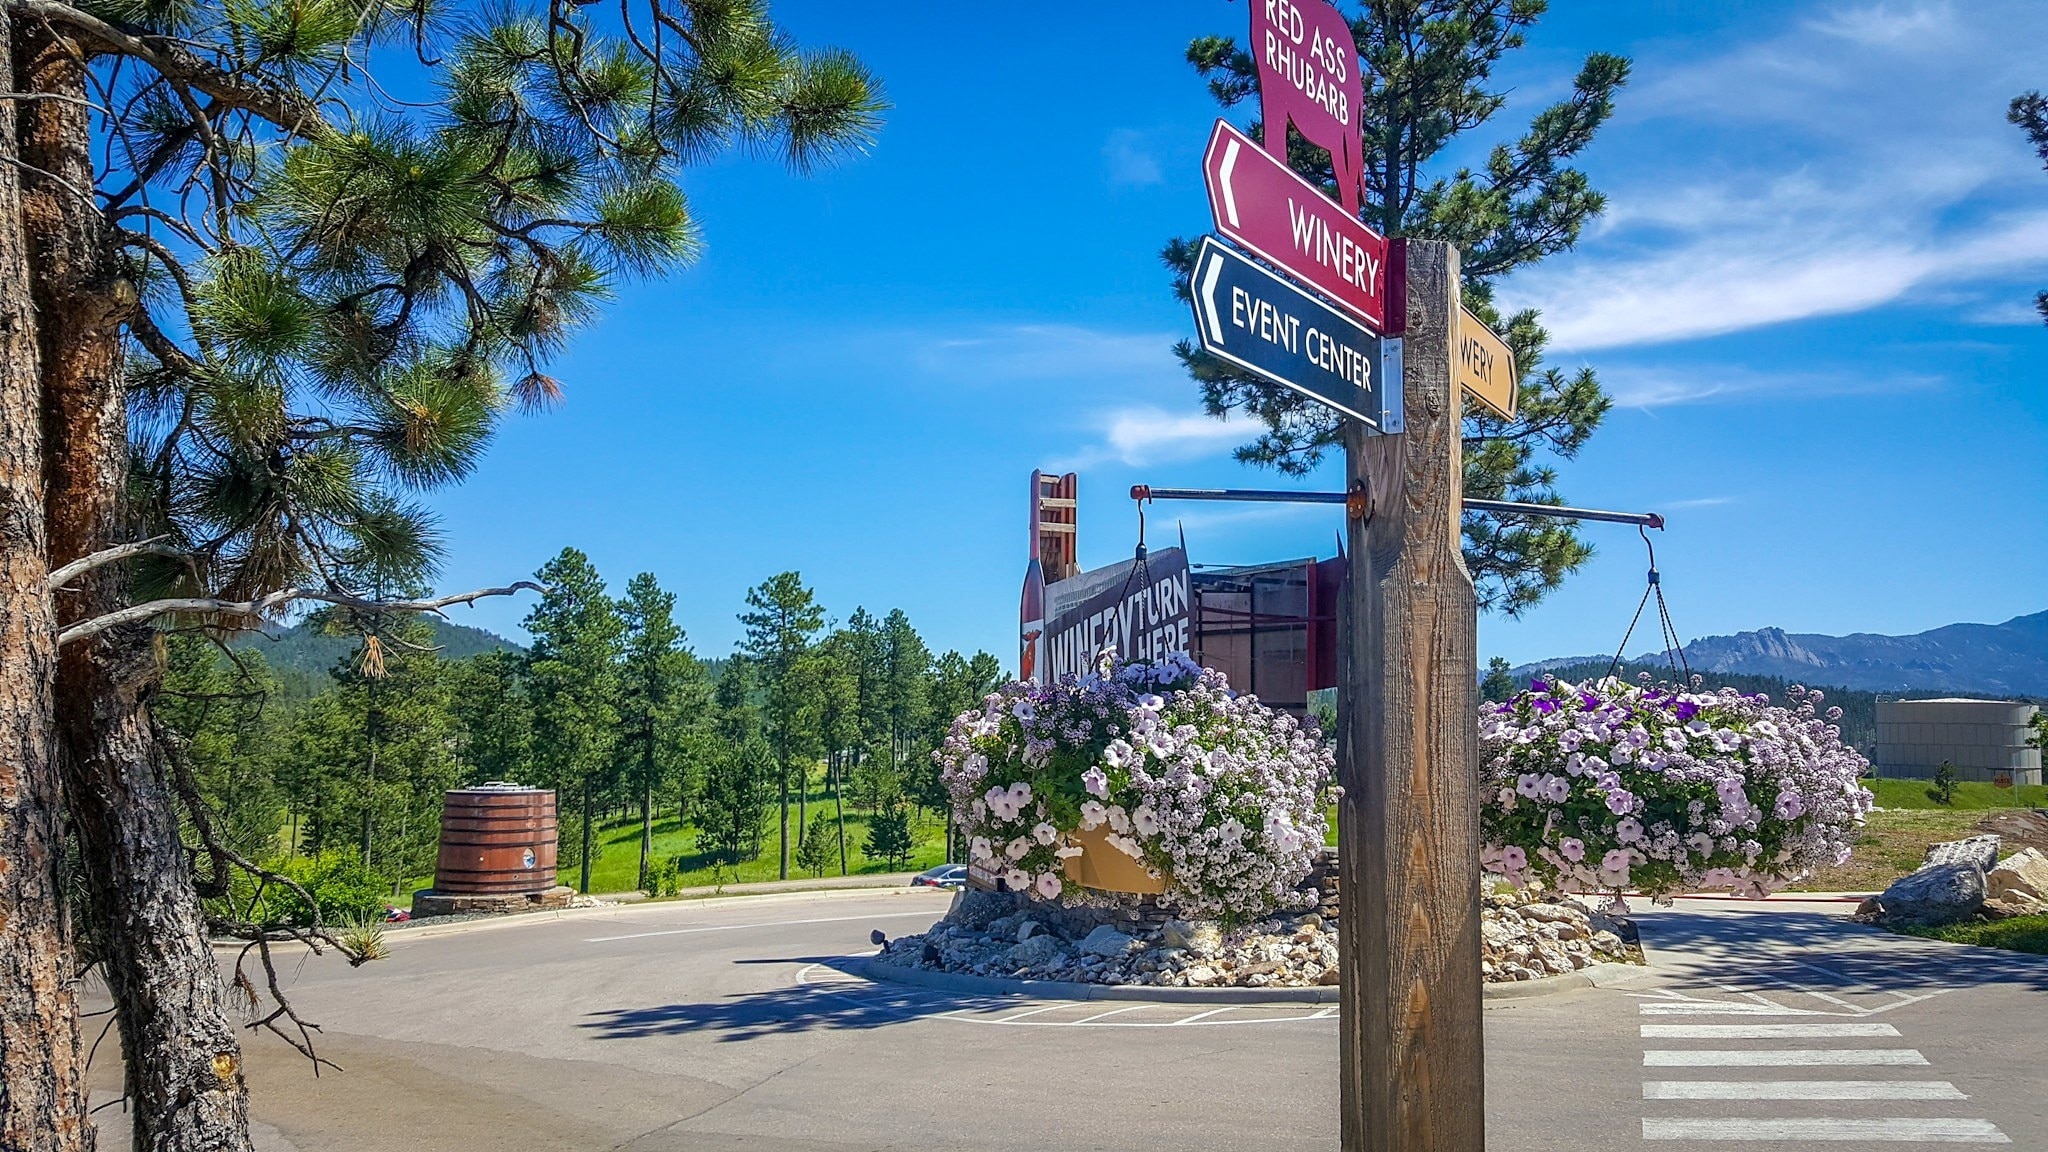 When in the Black Hills, get your drink on at Prairie Berry Winery!